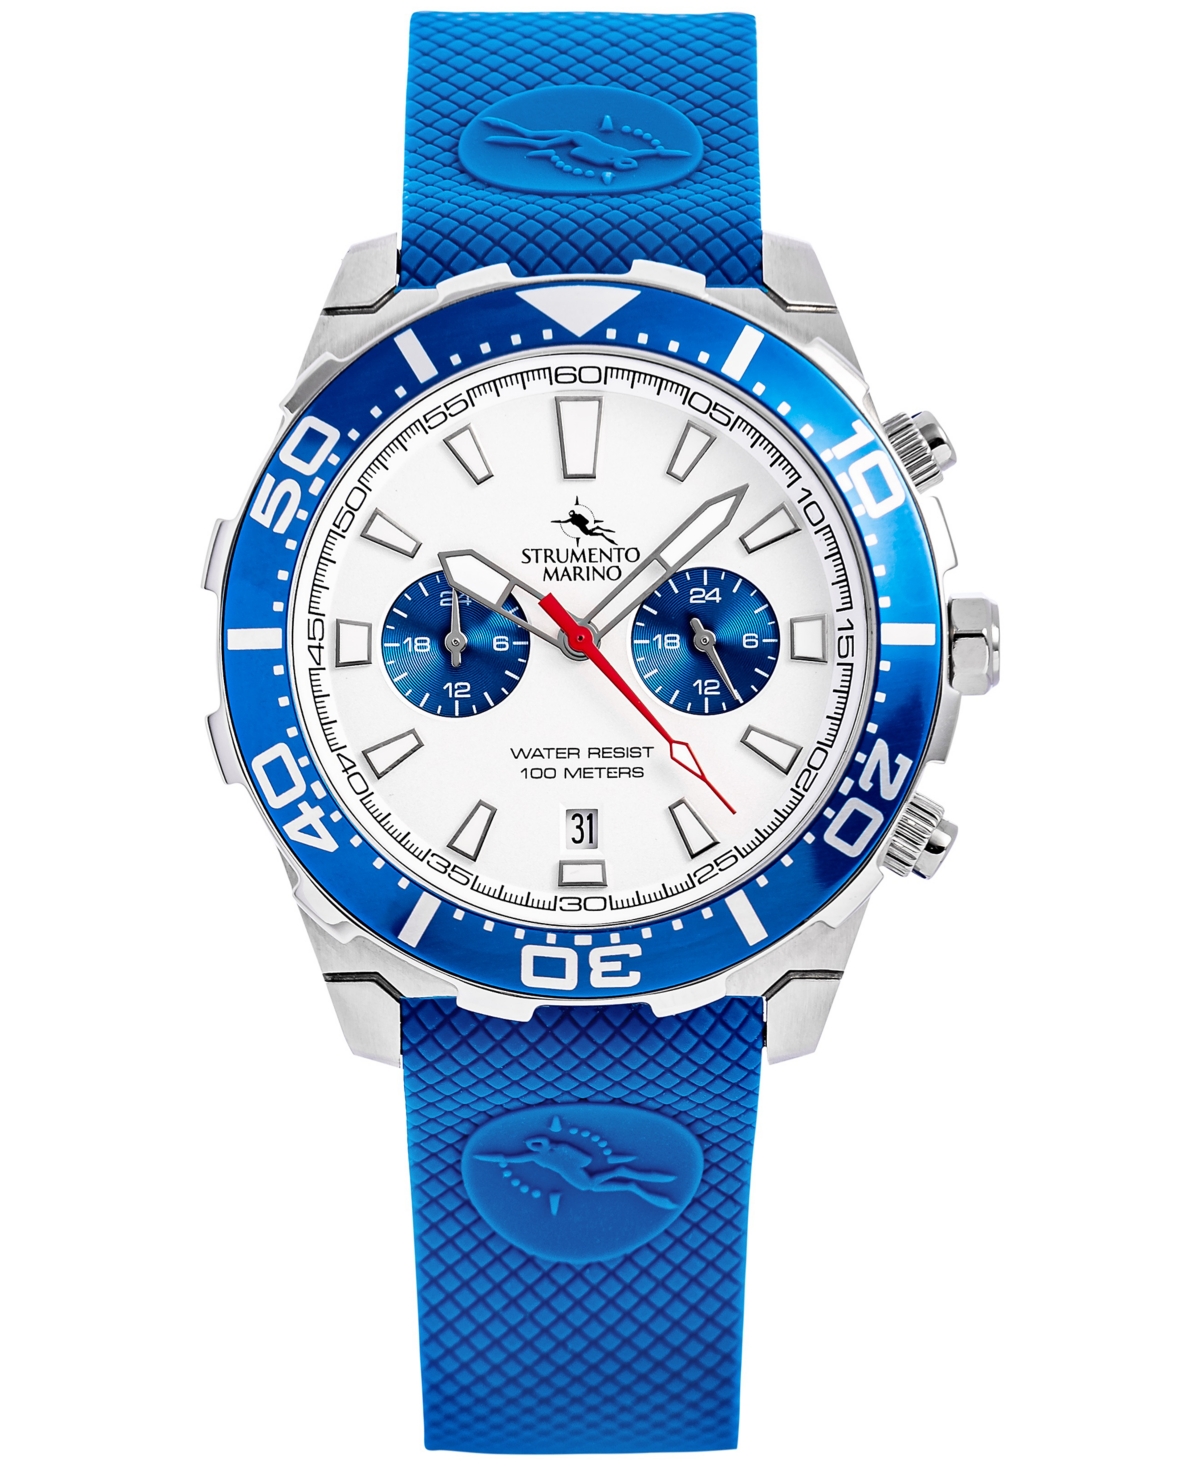 Men's Skipper Dual Time Zone Blue Silicone Strap Watch 44mm, Created for Macy's - Stainless Steel  Blue